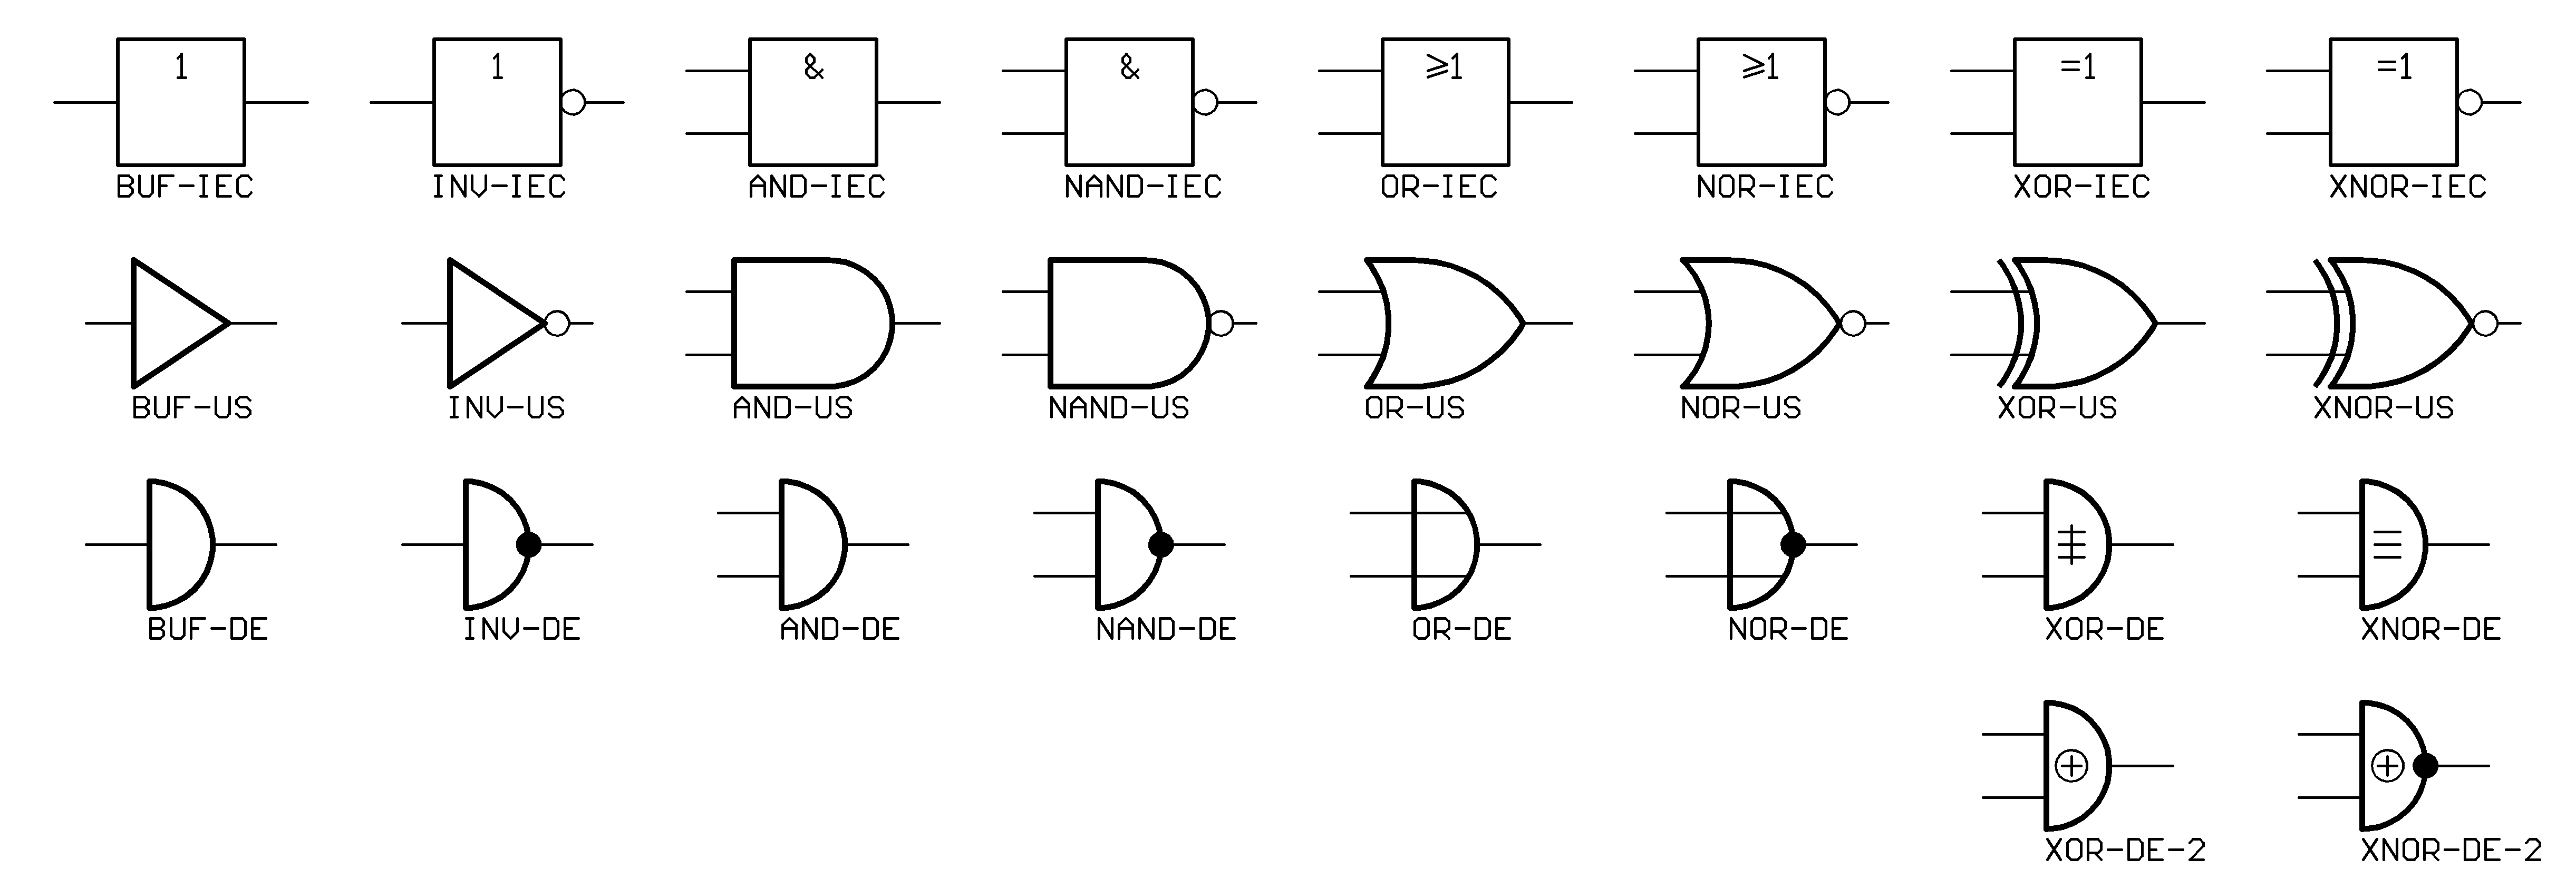 File:Logic-gate-index.png - Wikimedia Commons